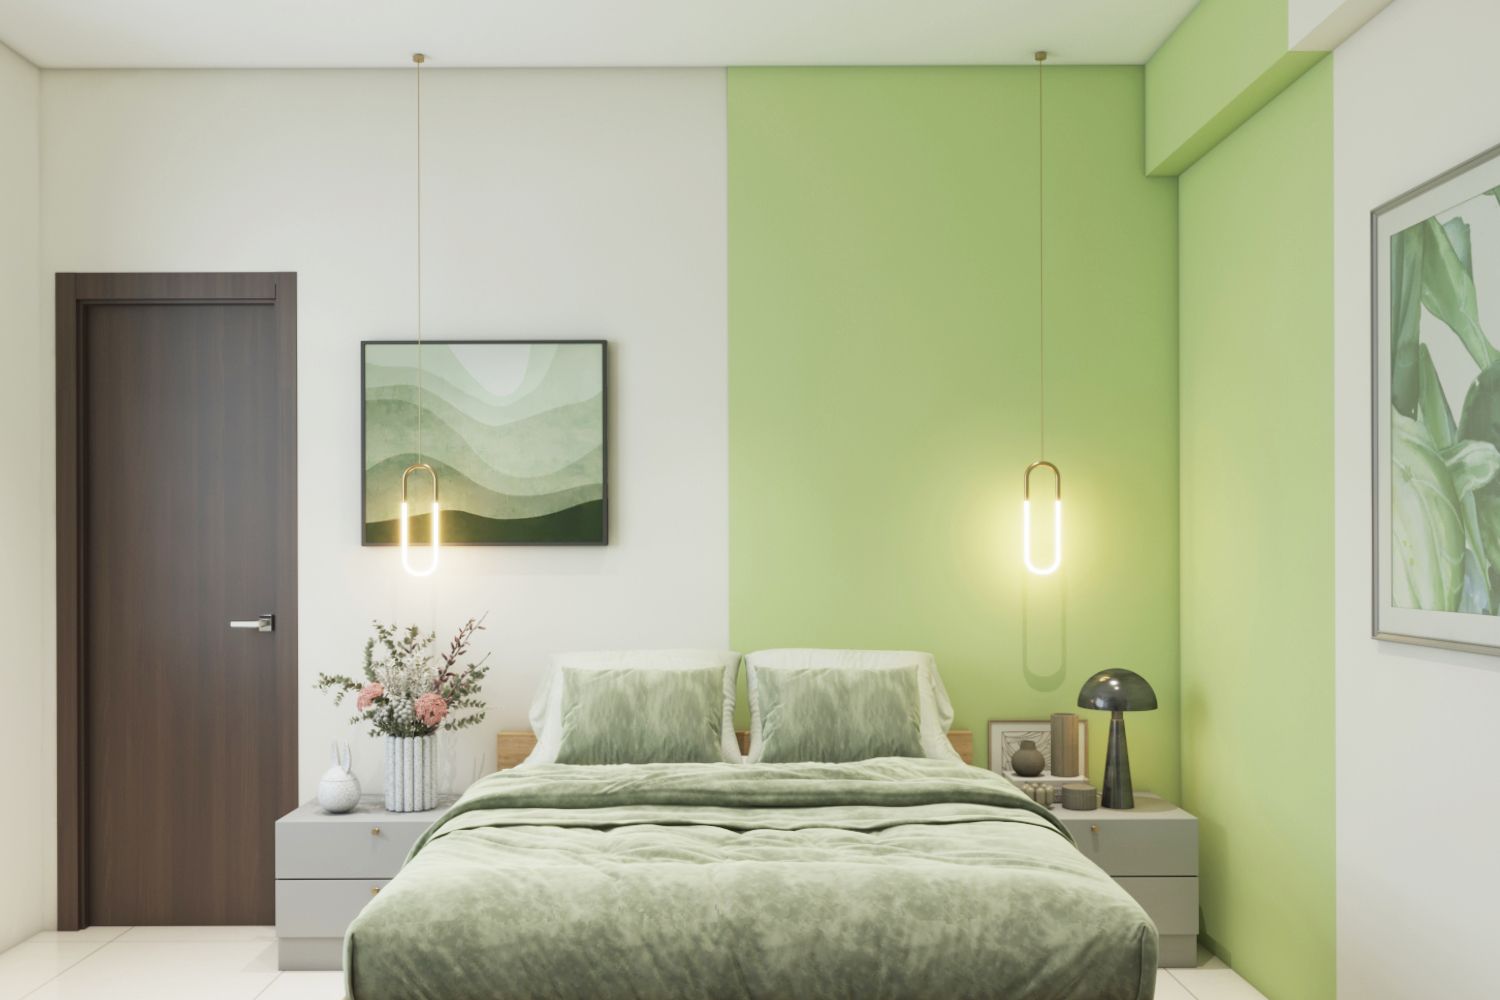 Modern Dual-Toned Green And White Wall Paint Design For Bedrooms